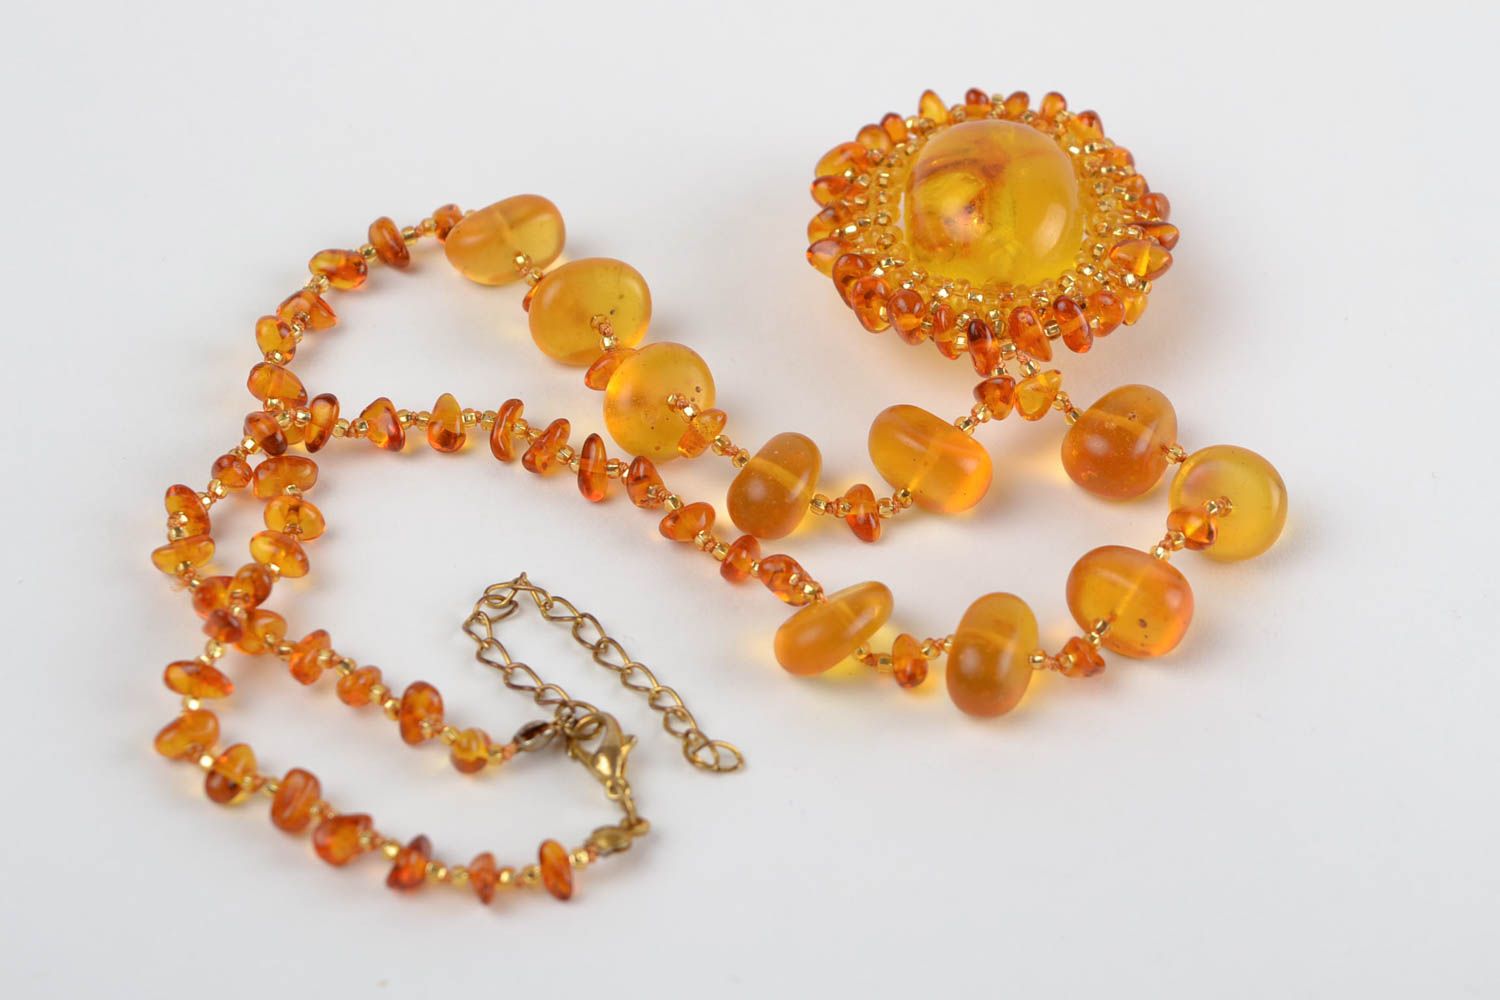 Handmade cute long pendant made of beads and natural stones of amber color photo 5